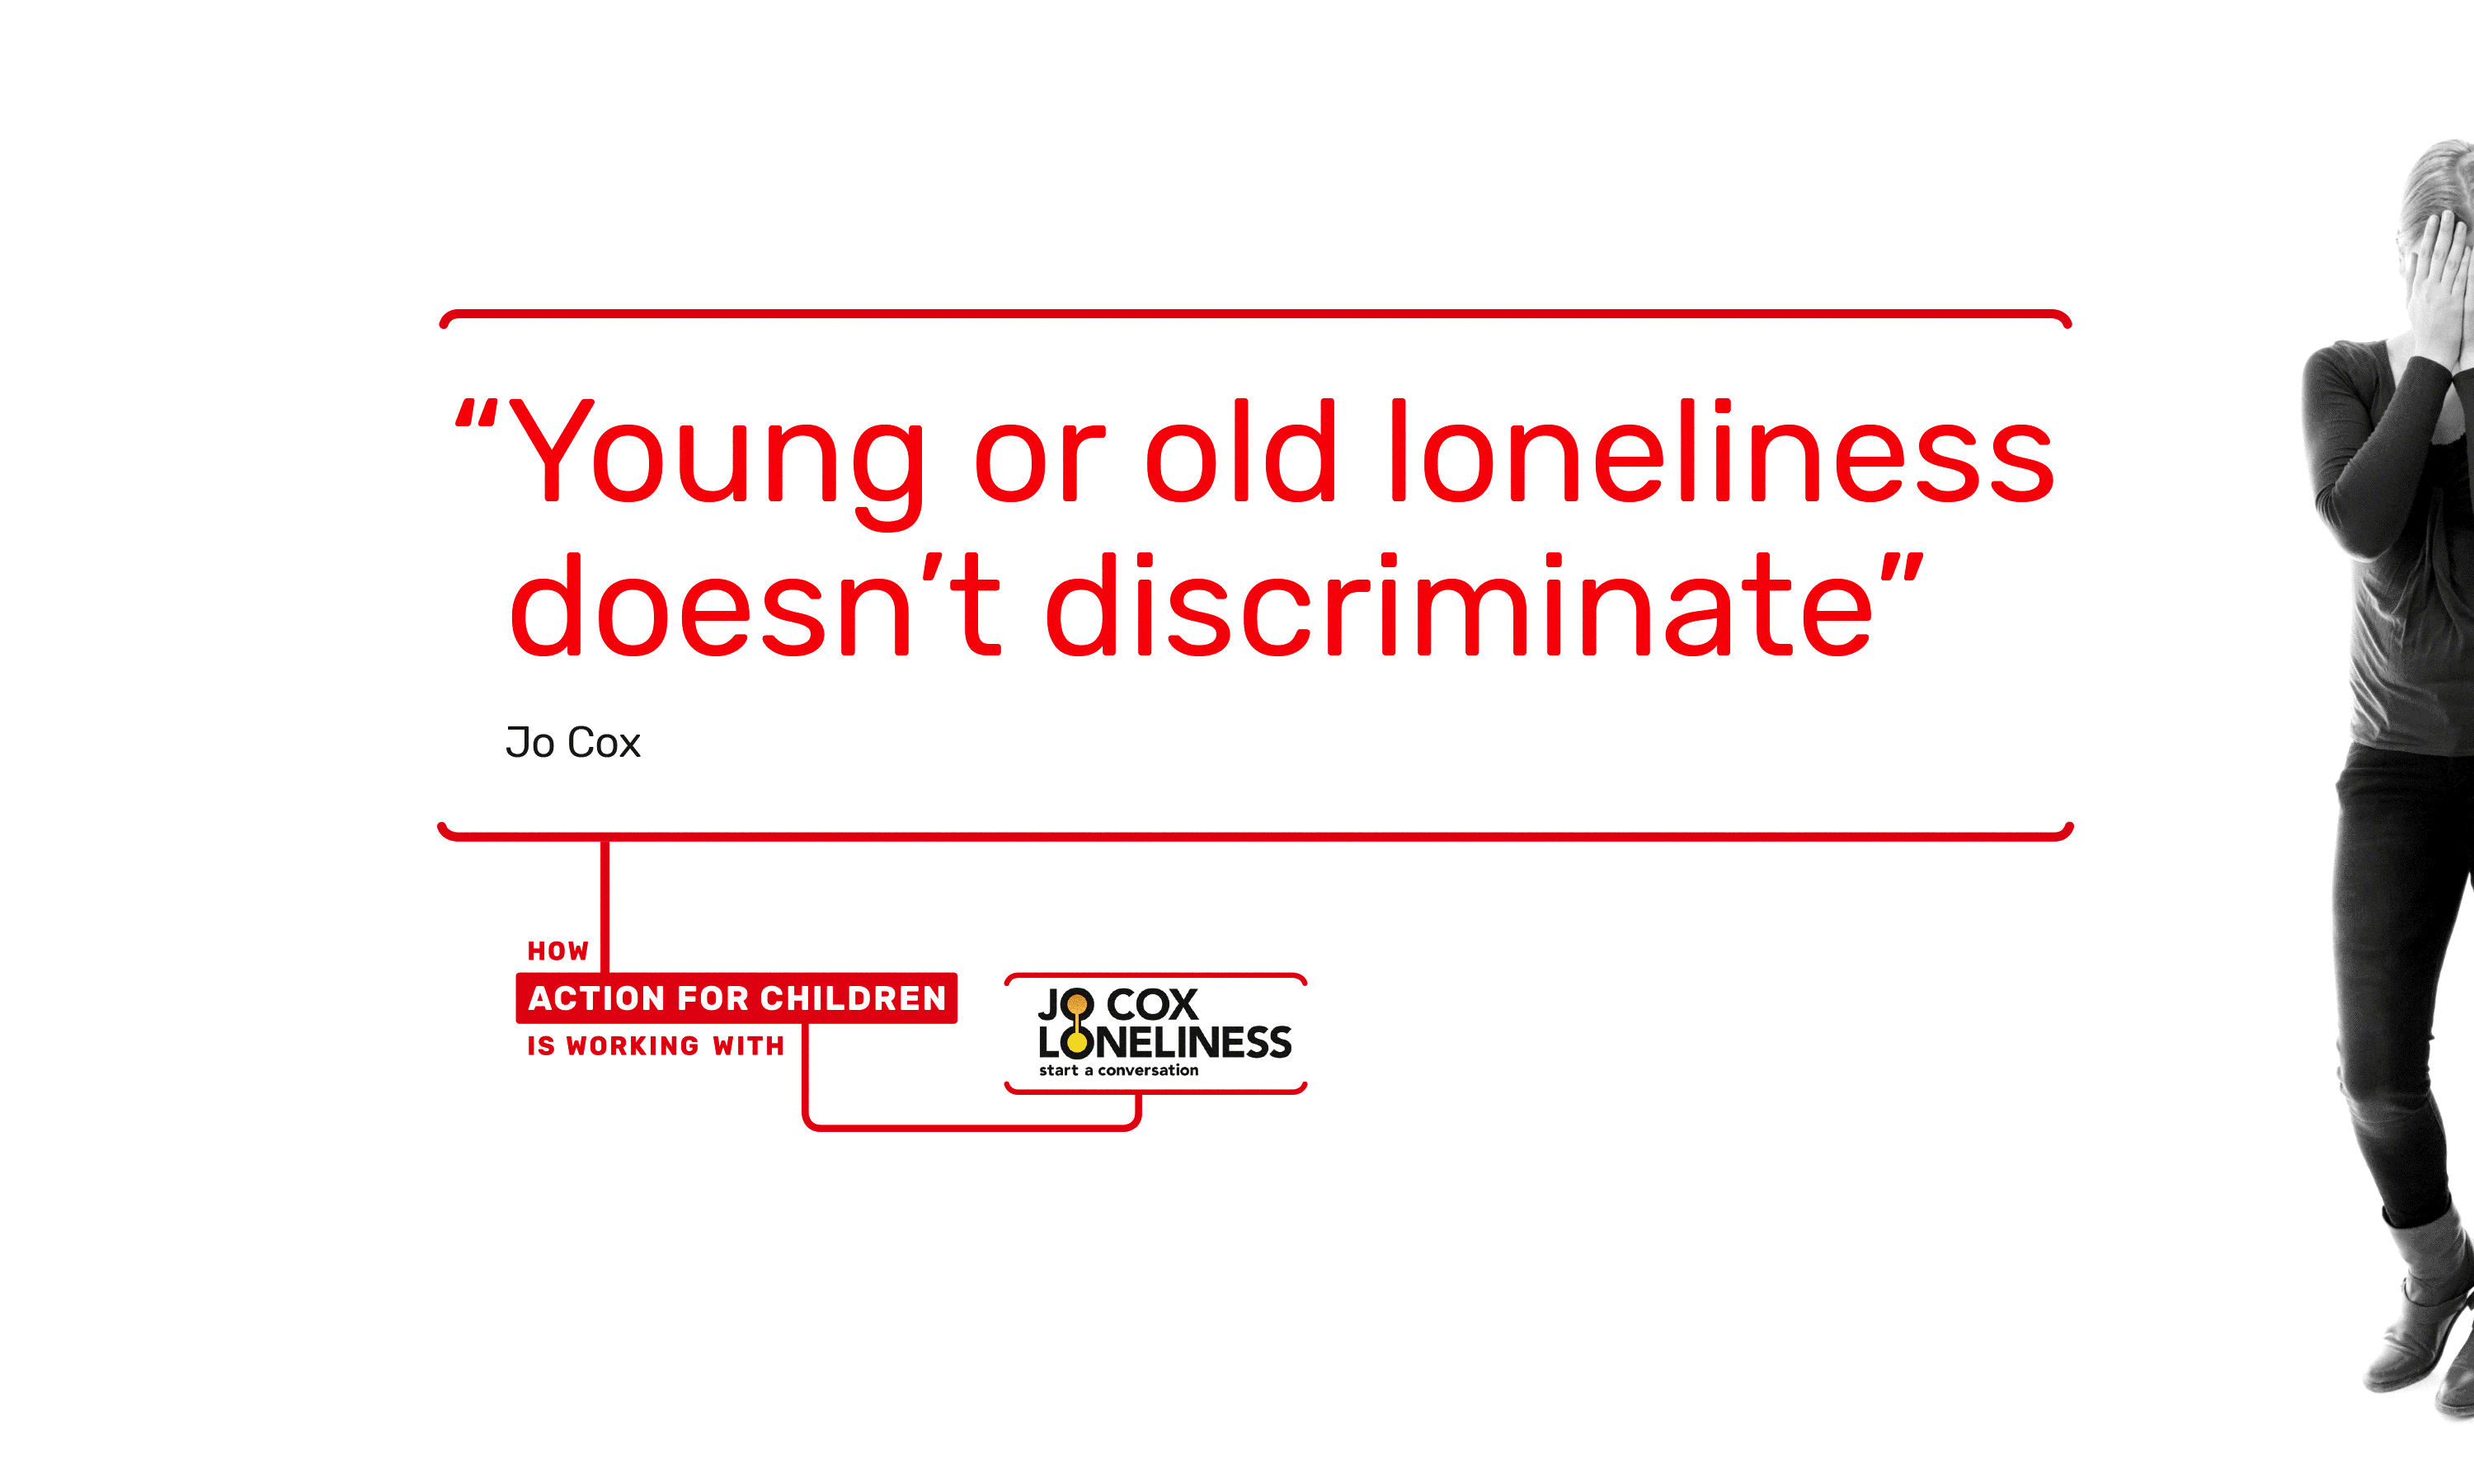 Brand campaign by Neon - designed by Dana Robertson - Action for children Jo Cox loneliness awareness campaign - Posters 6